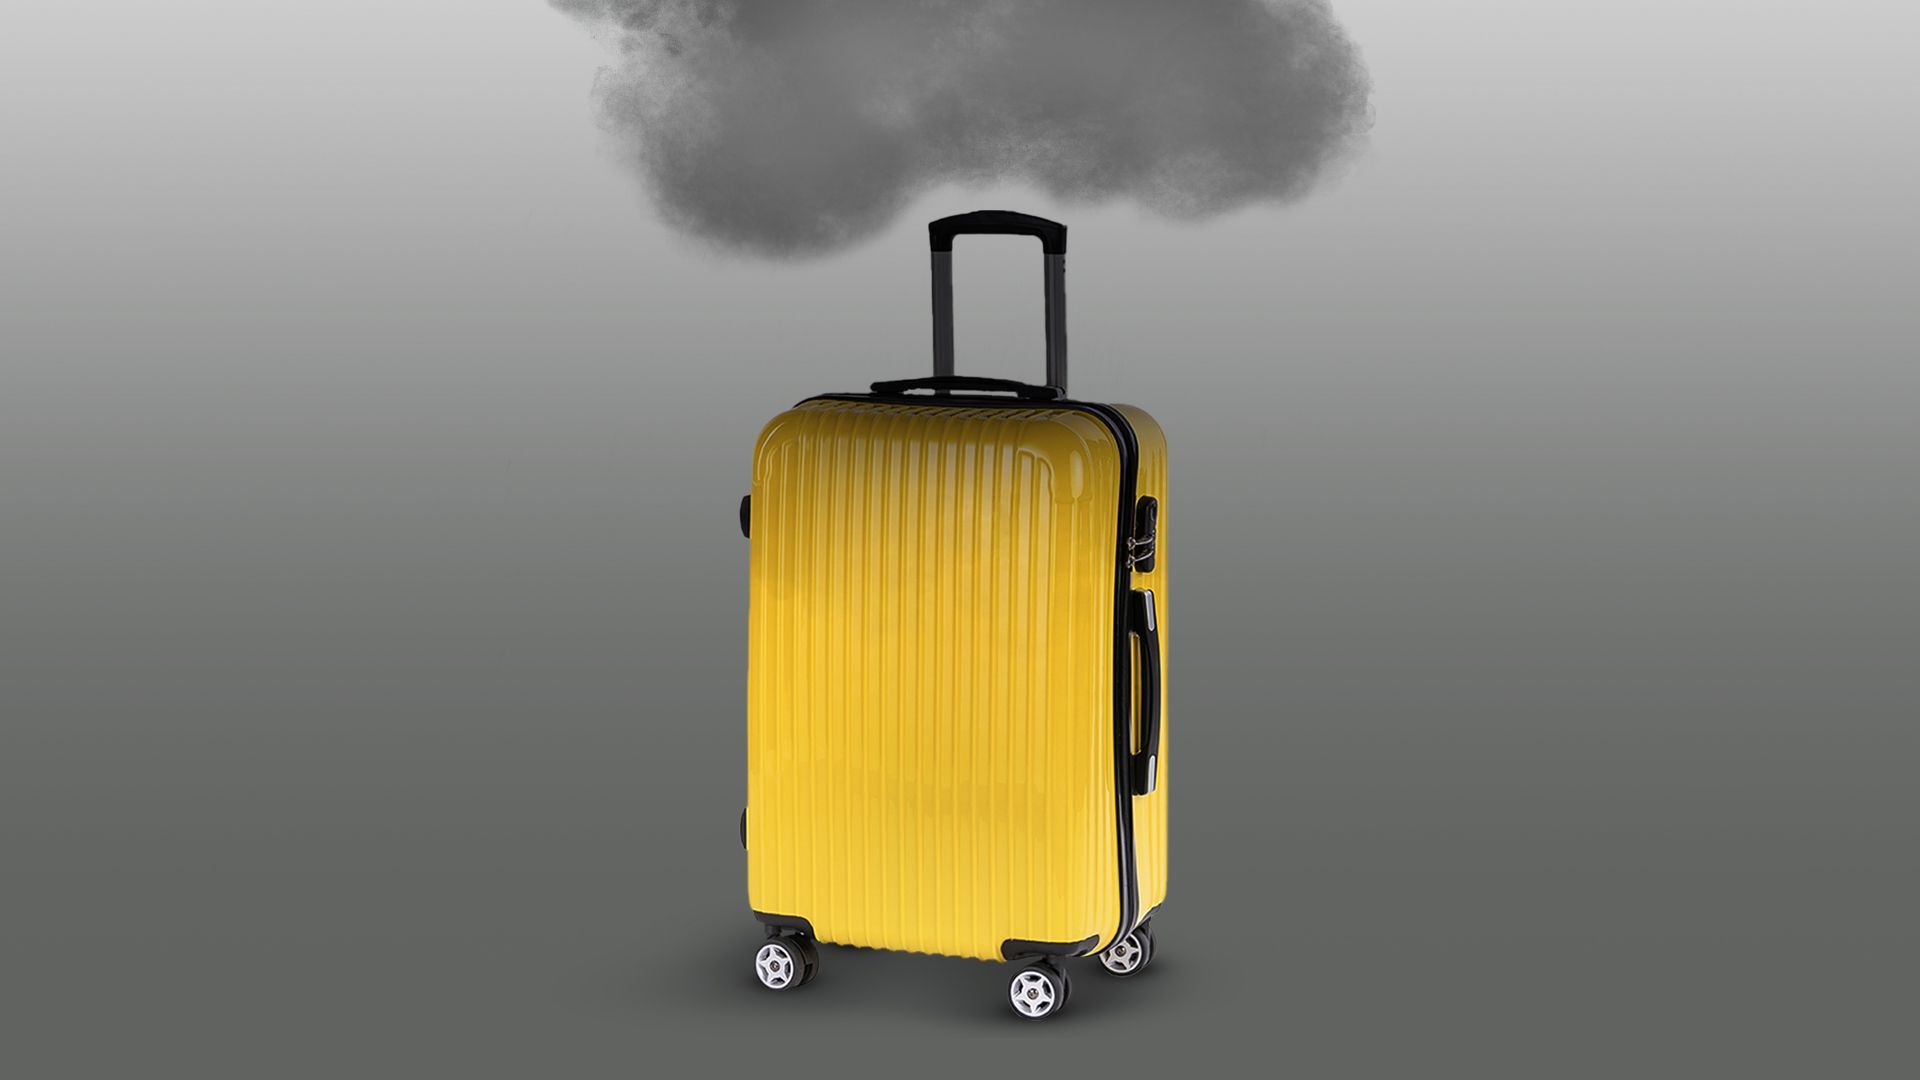 Illustration of a rolling suitcase with a dark cloud hovering above it